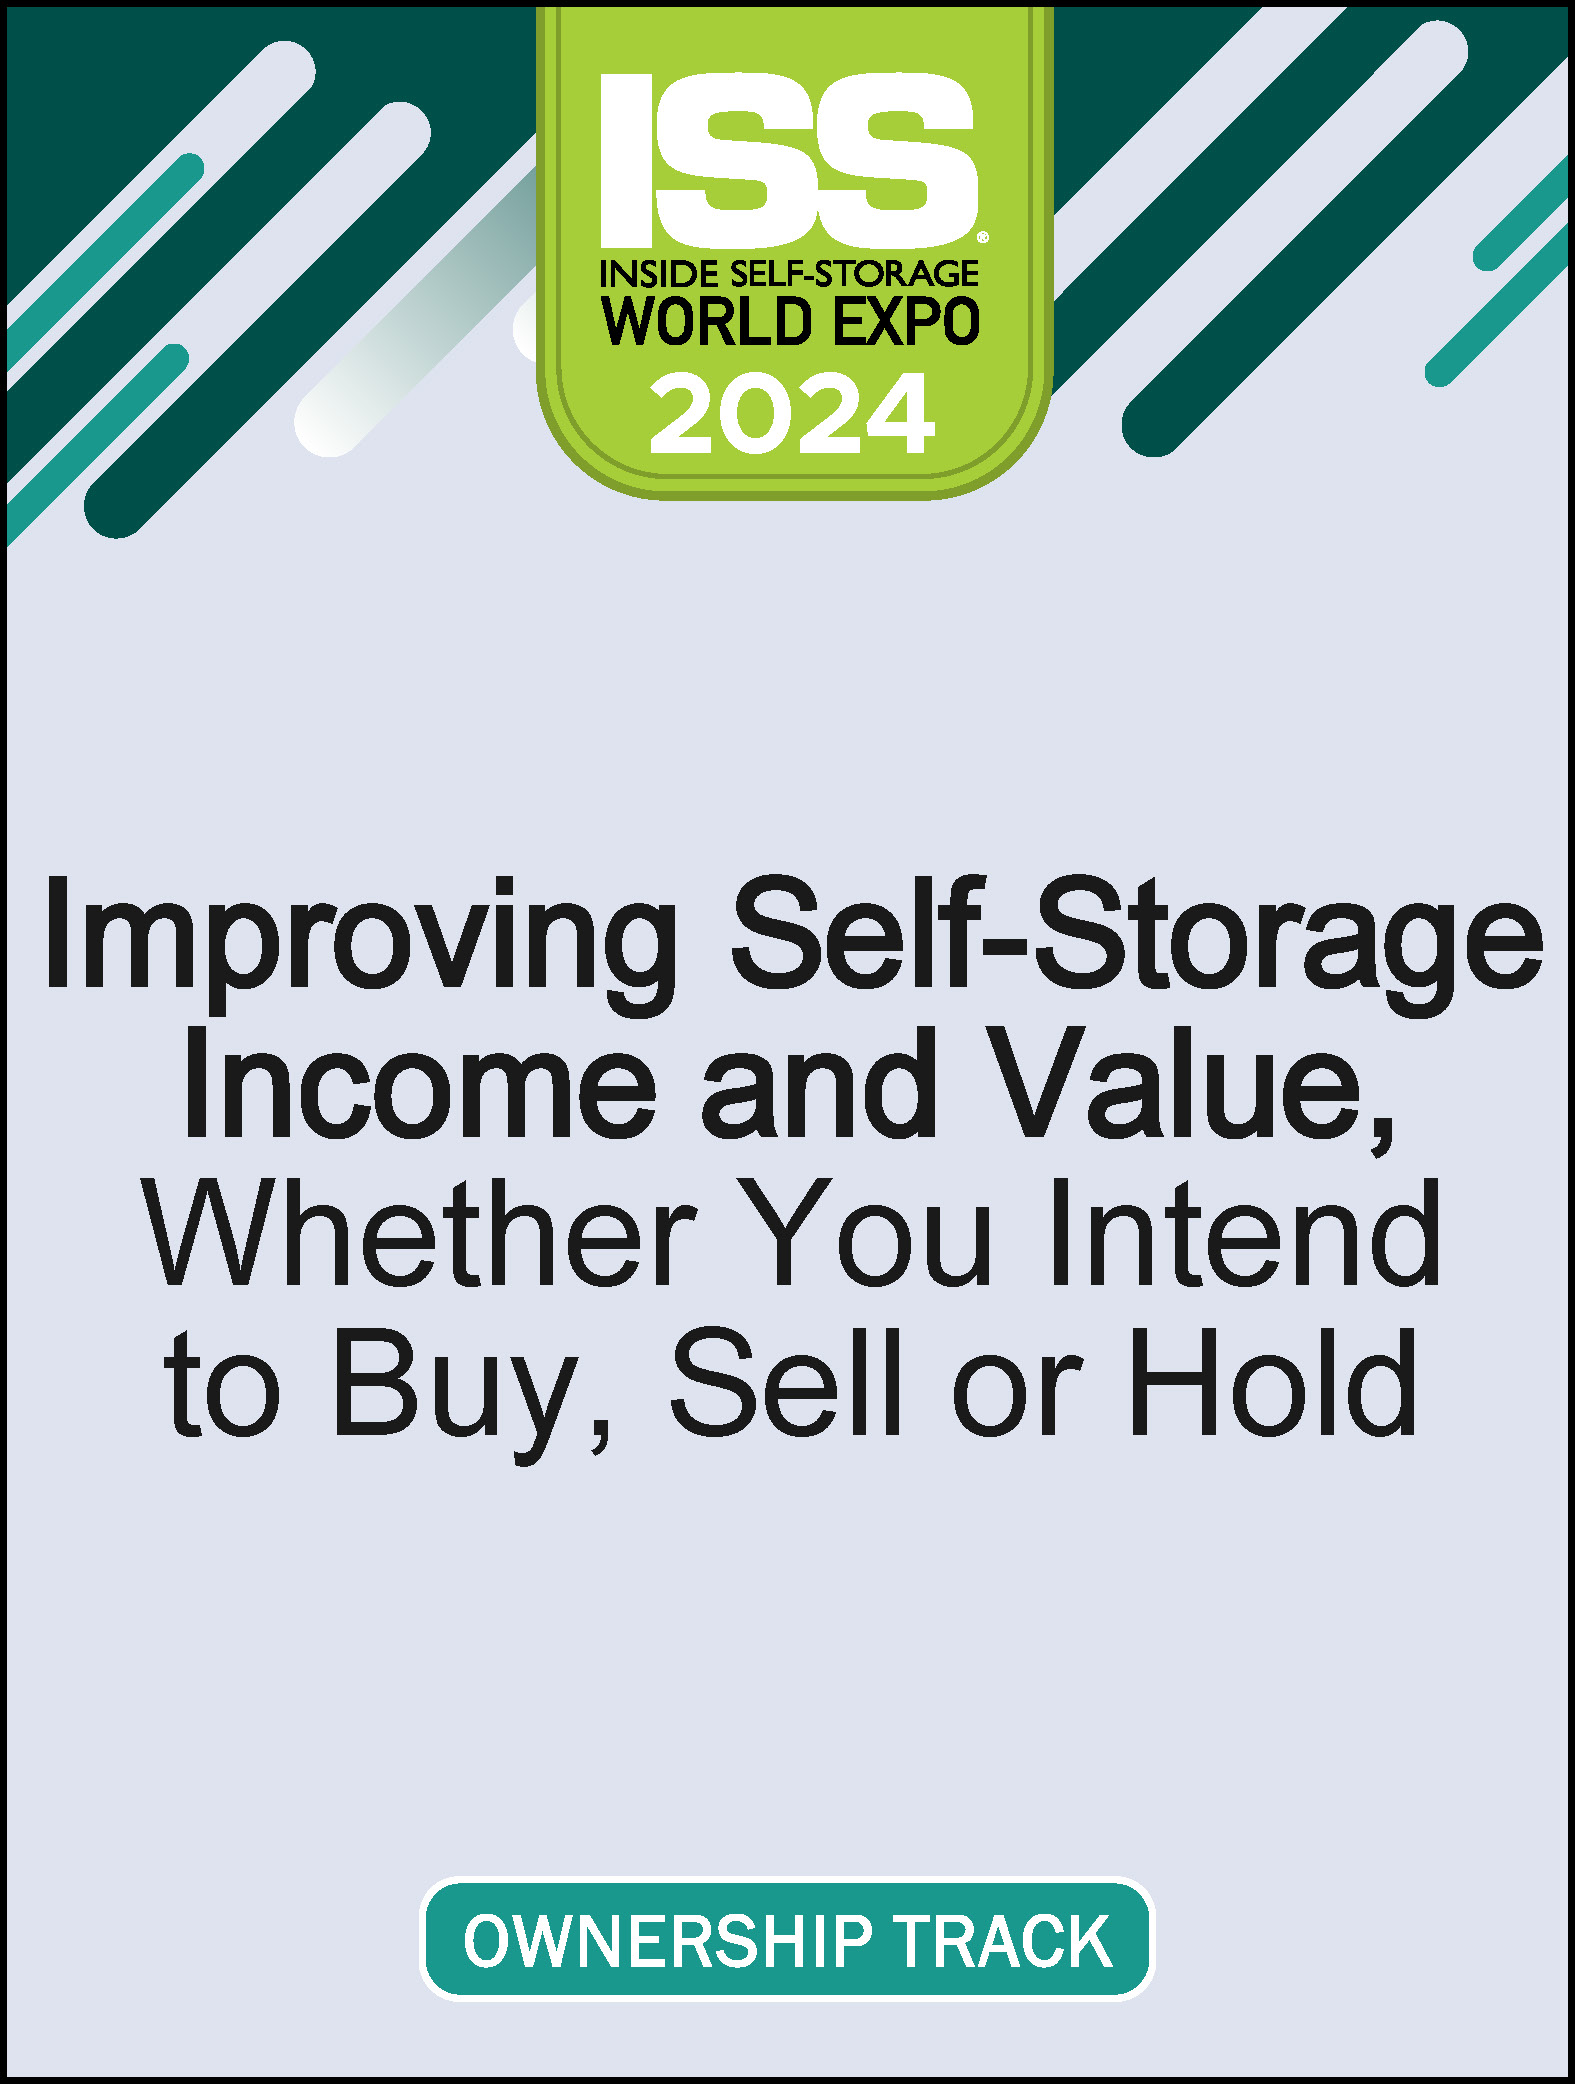 Video Pre-Order - Improving Self-Storage Income and Value, Whether You Intend to Buy, Sell or Hold